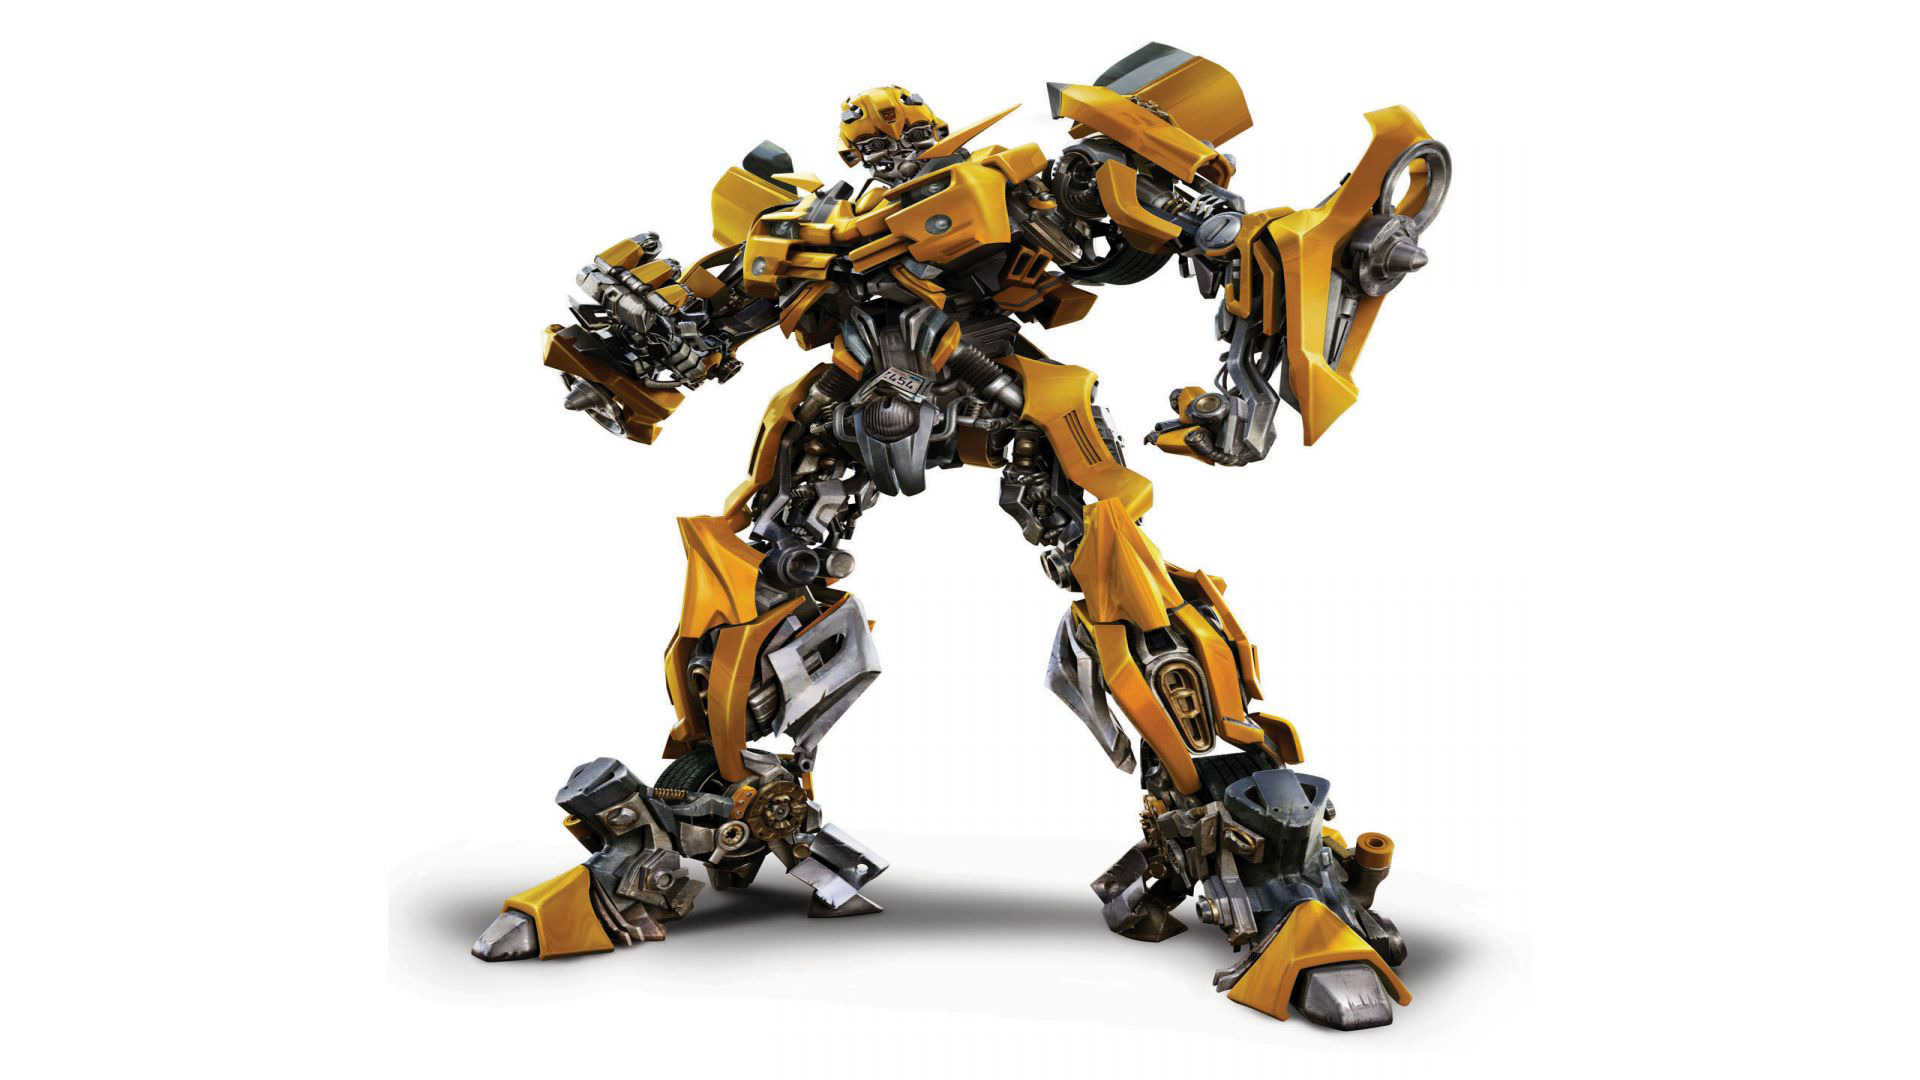 Movie Backgrounds, 779973 Transformers Bumblebee Wallpapers, by